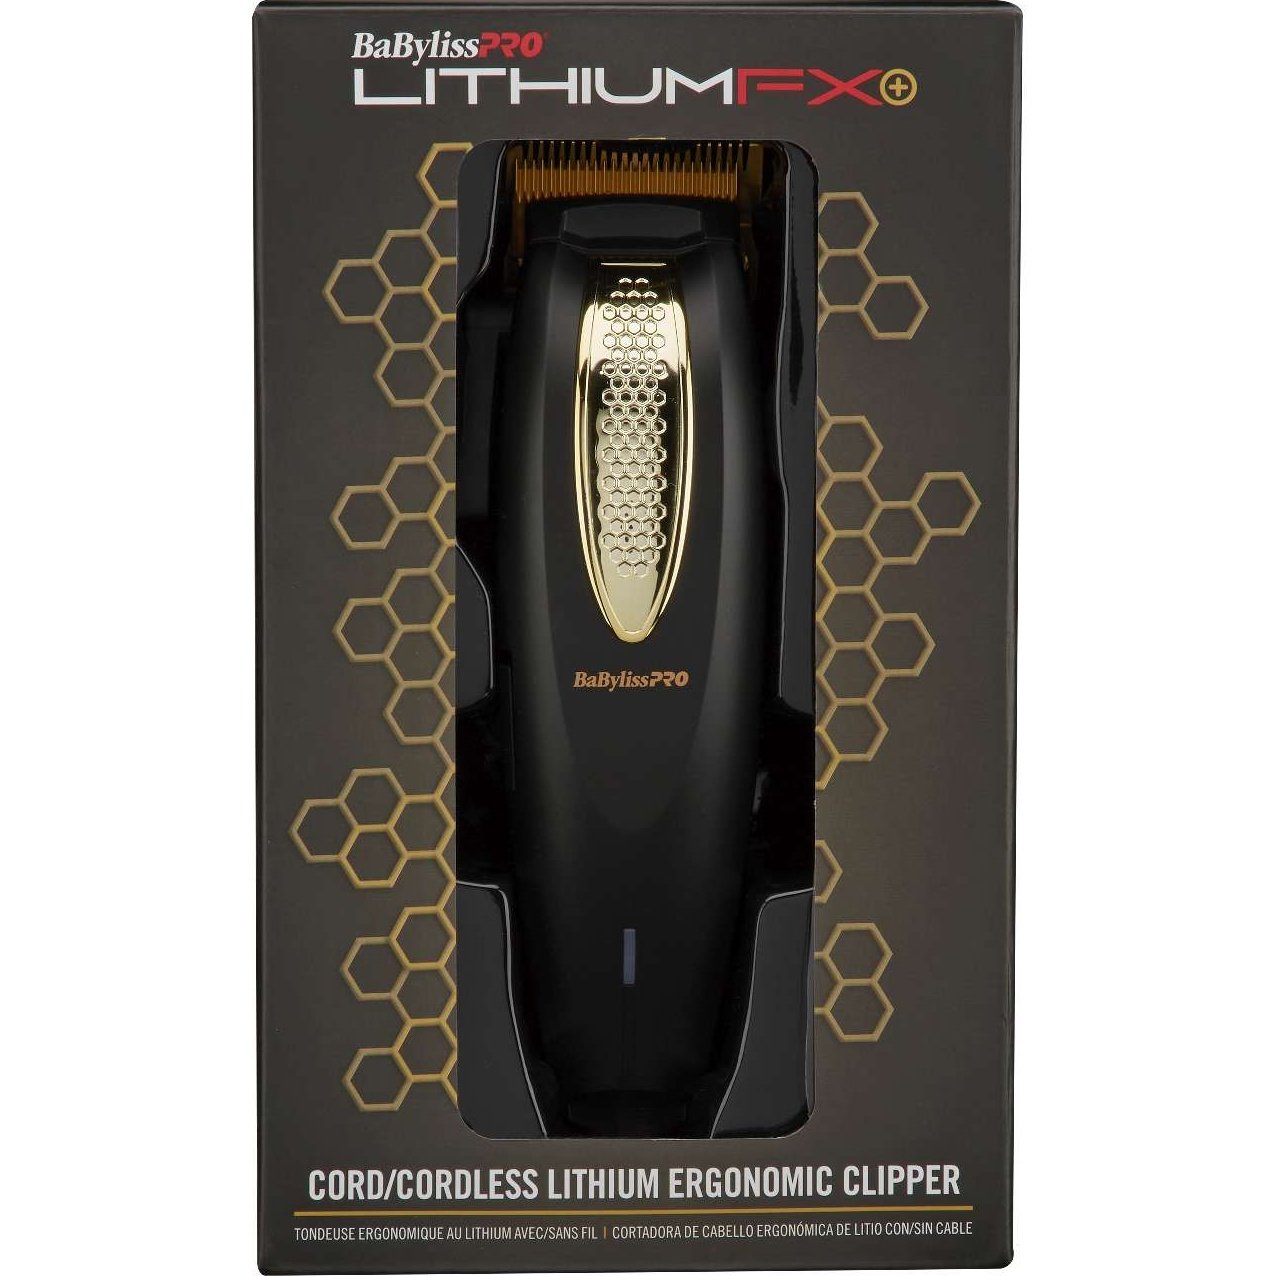 Babyliss Lithiumfx Cor Cordless Lithim Ergonomic Clipper New Onoff Switch